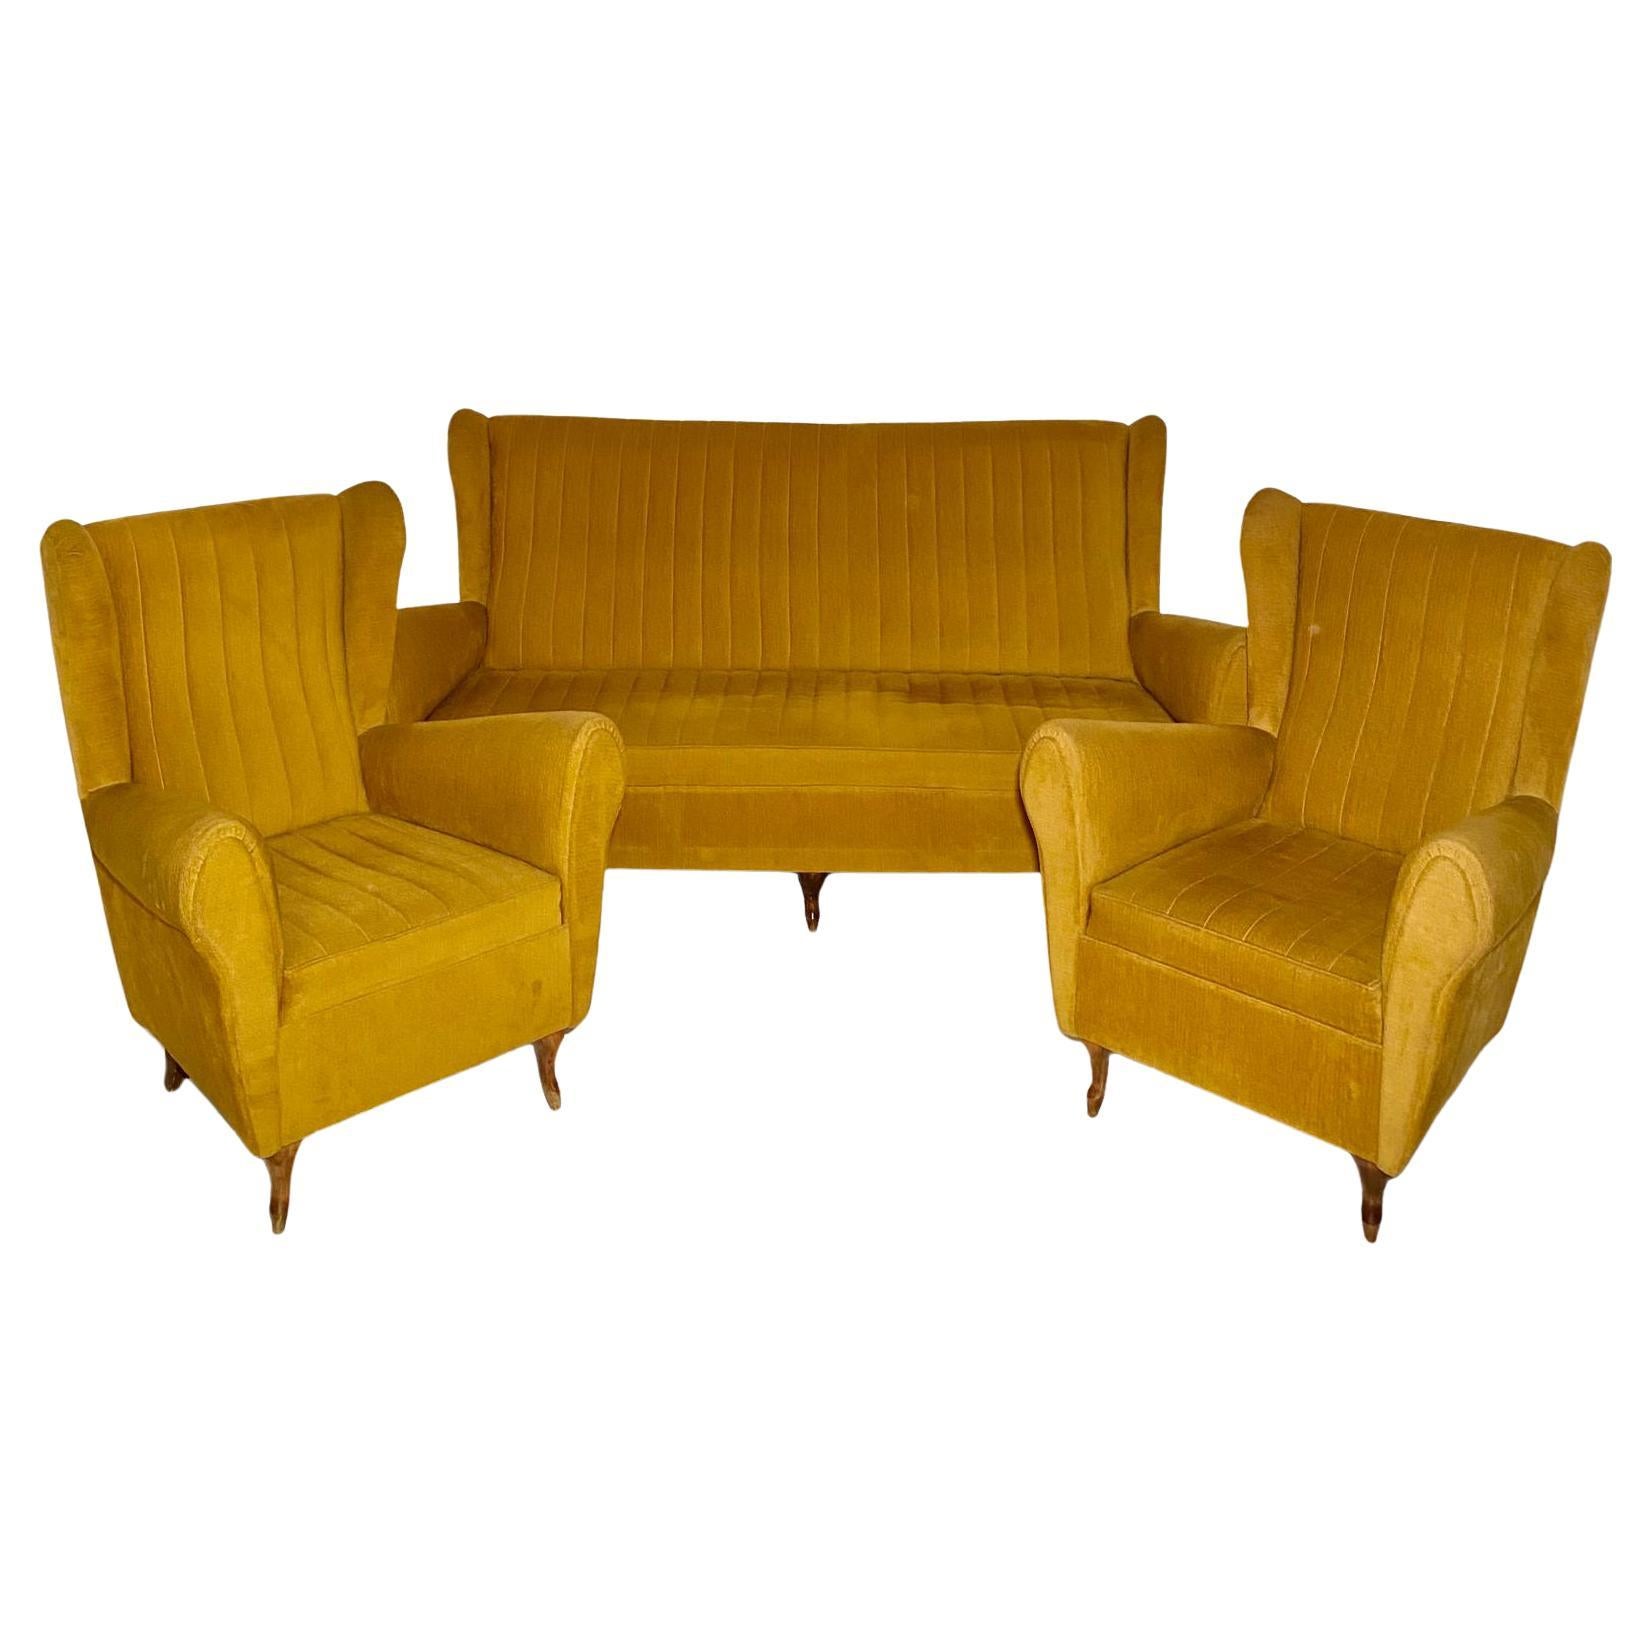 1950s Vintage Living Room Set, in the Style of Gio Ponti for Isa Bergamo